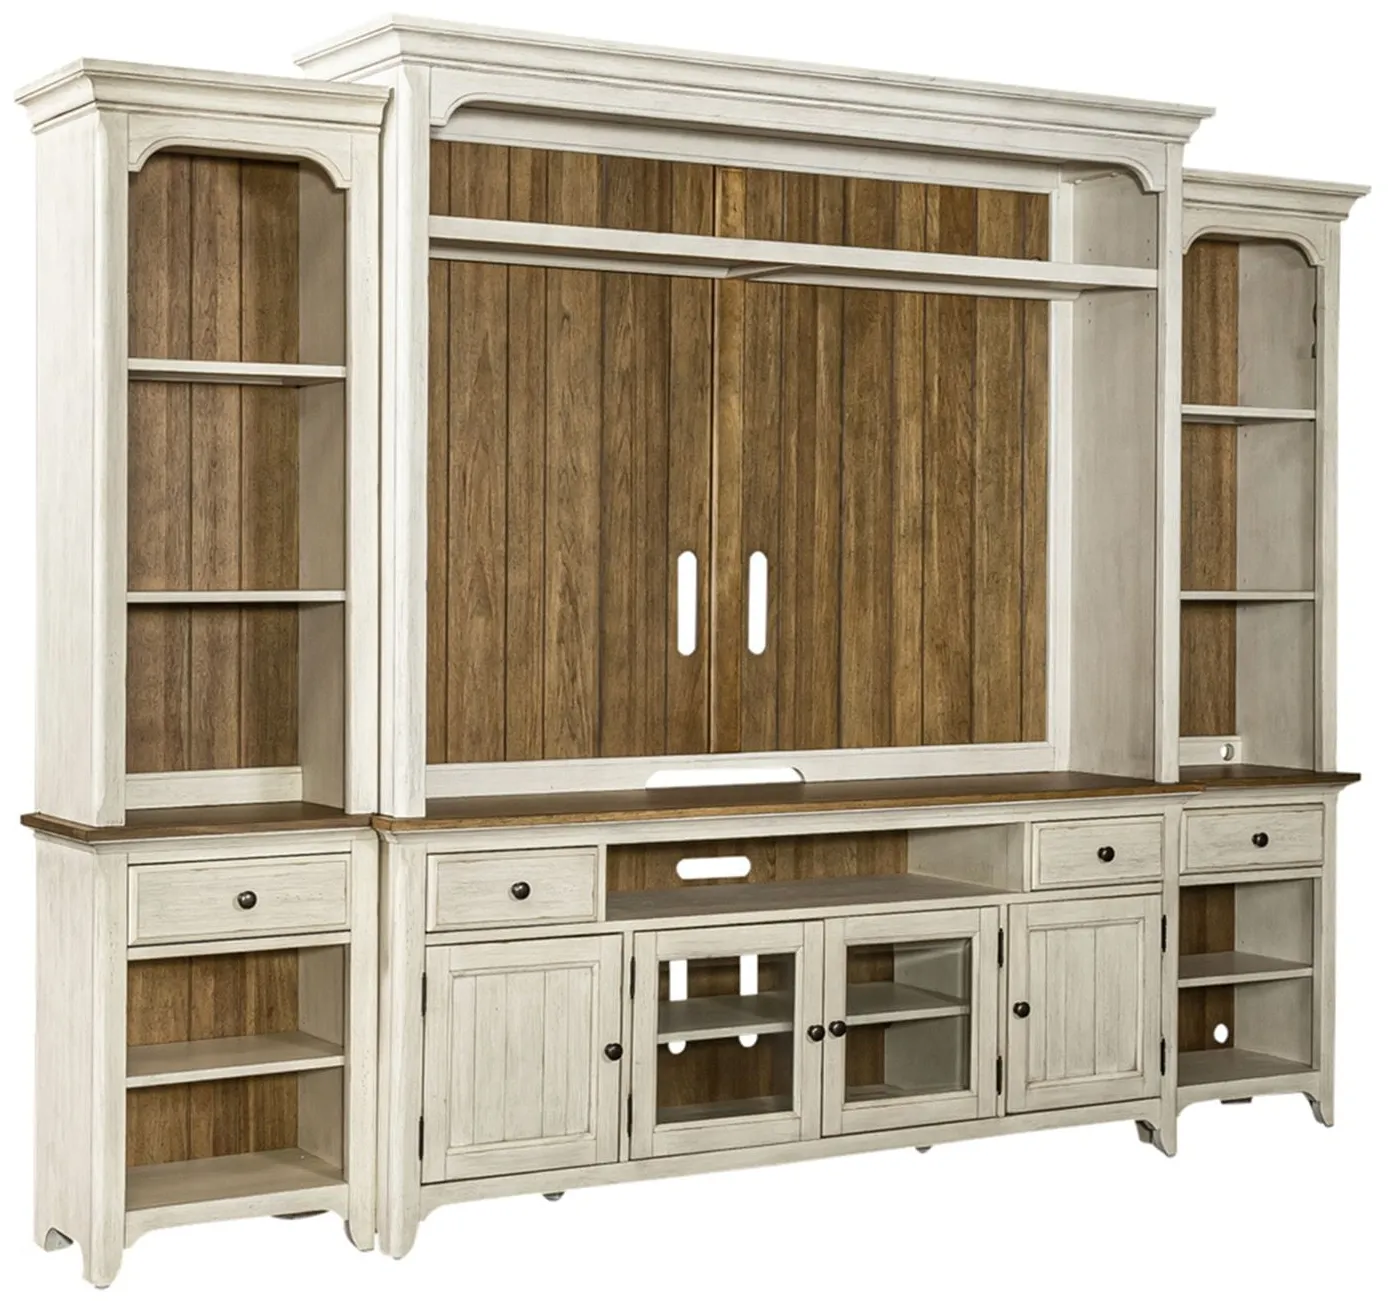 Farmhouse Reimagined Entertainment Center with Piers